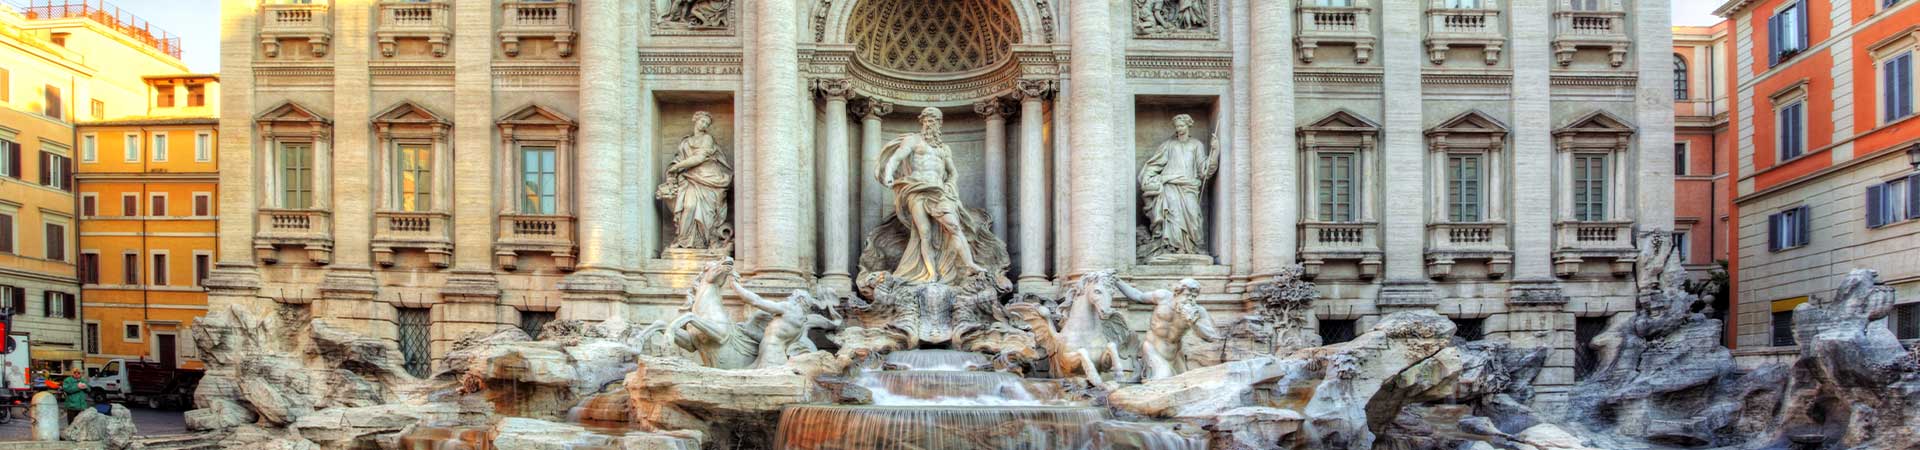 best of rome for less walking tour of rome